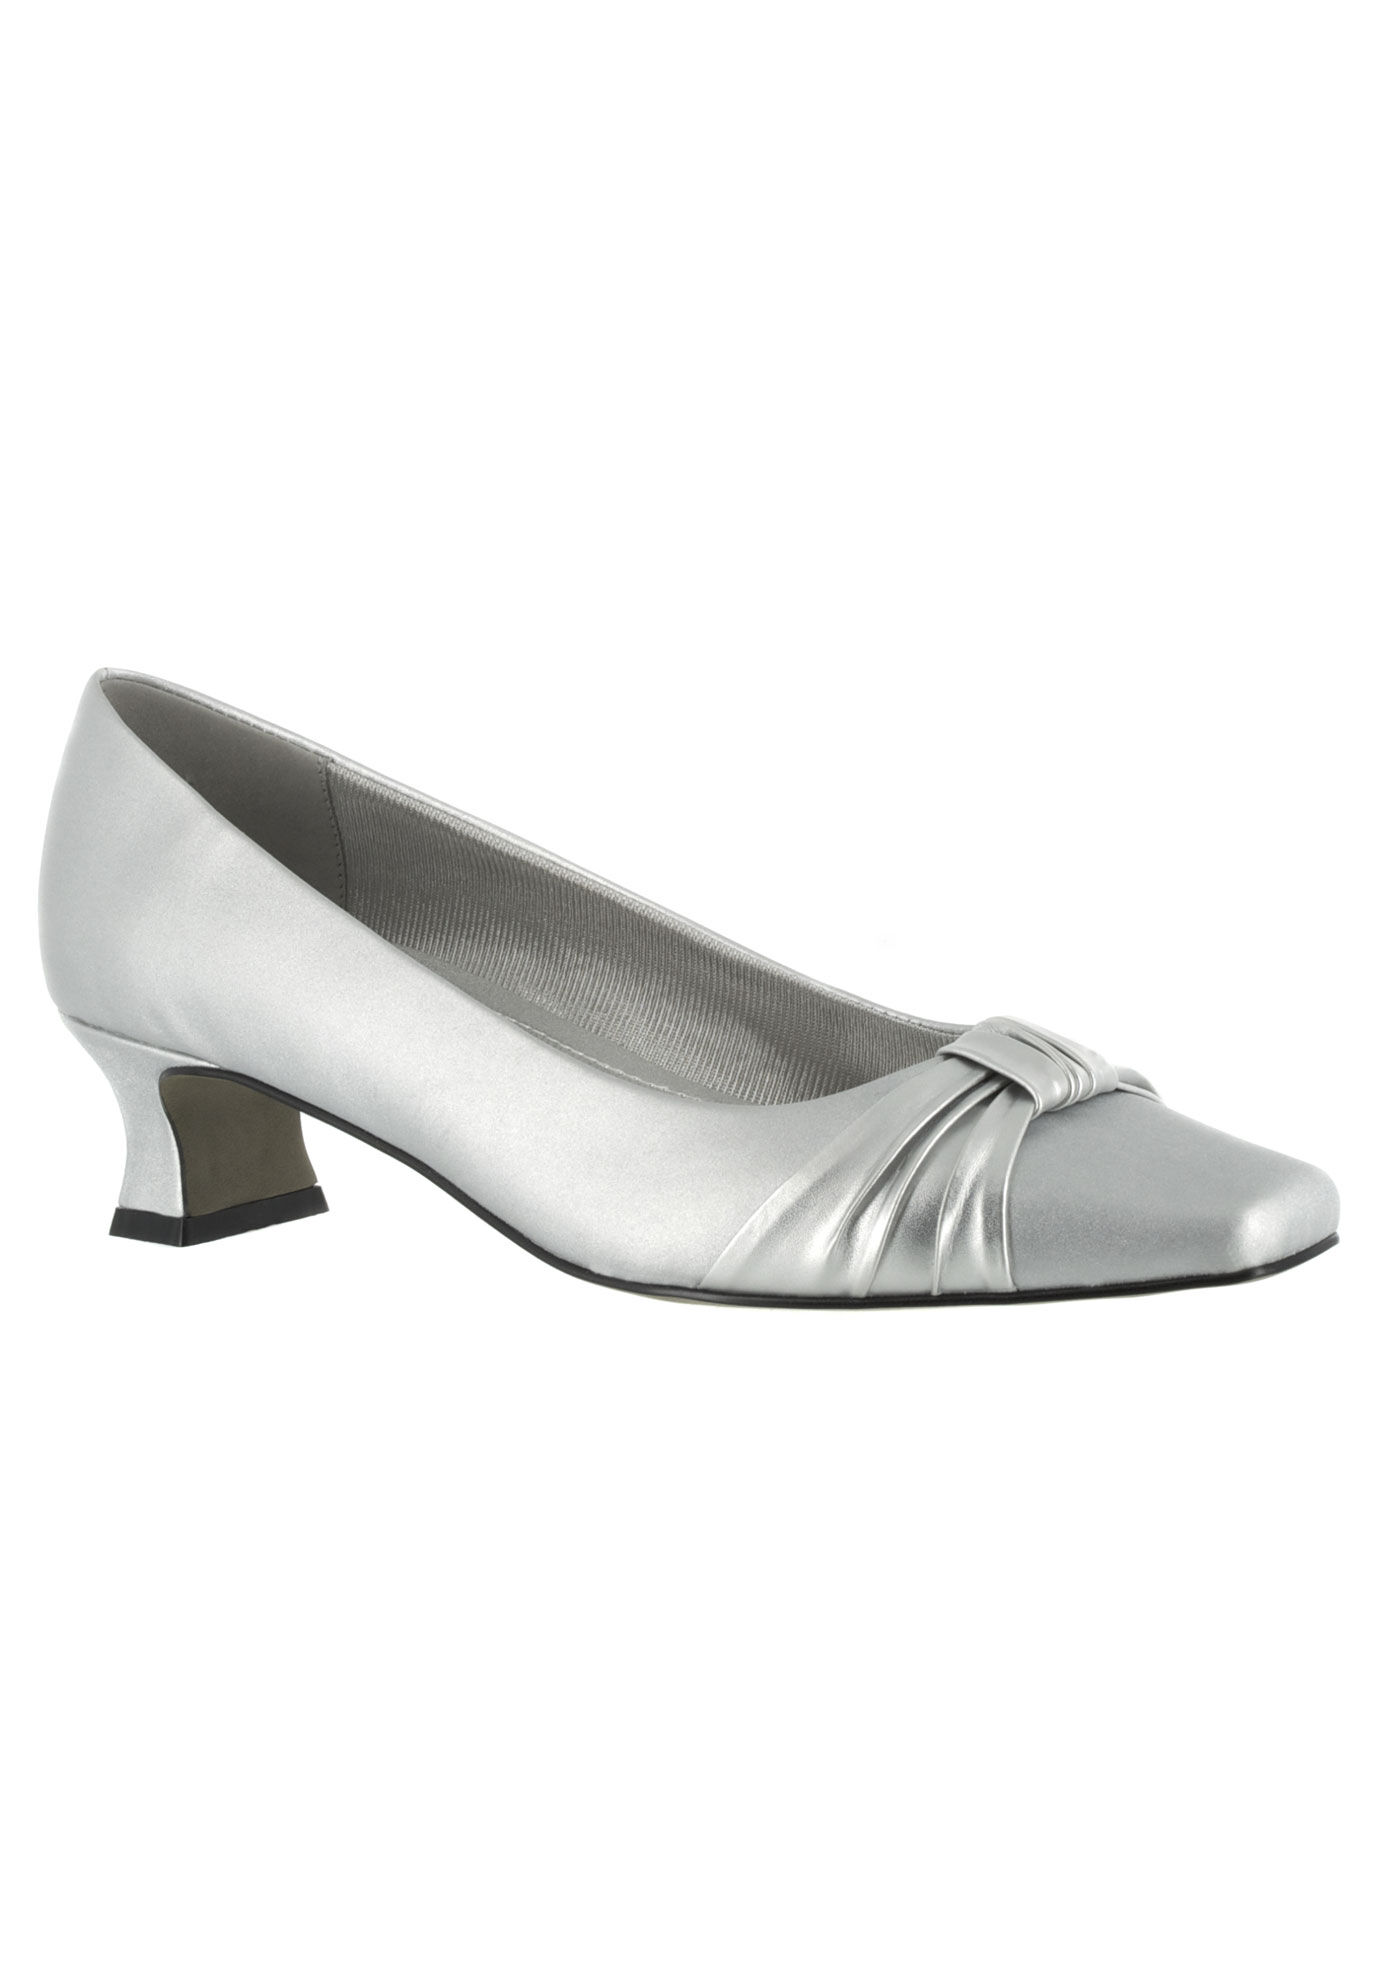 easy street silver dress shoes